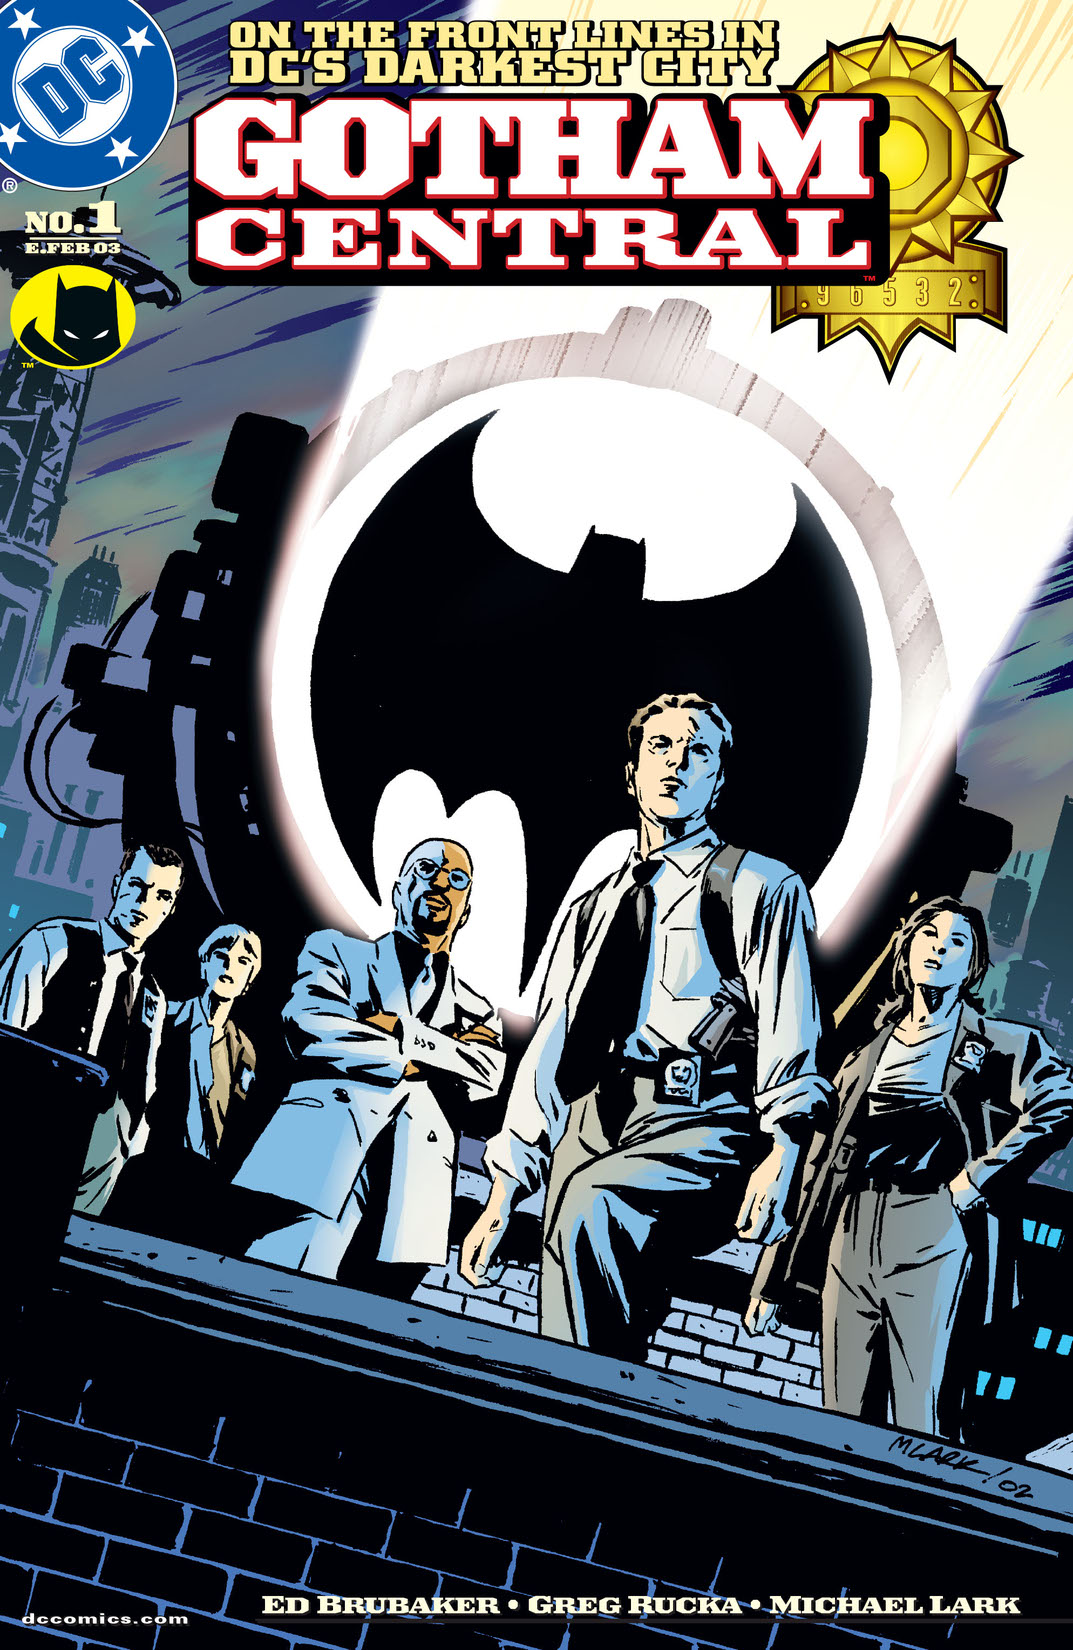 Gotham Central #1 preview images